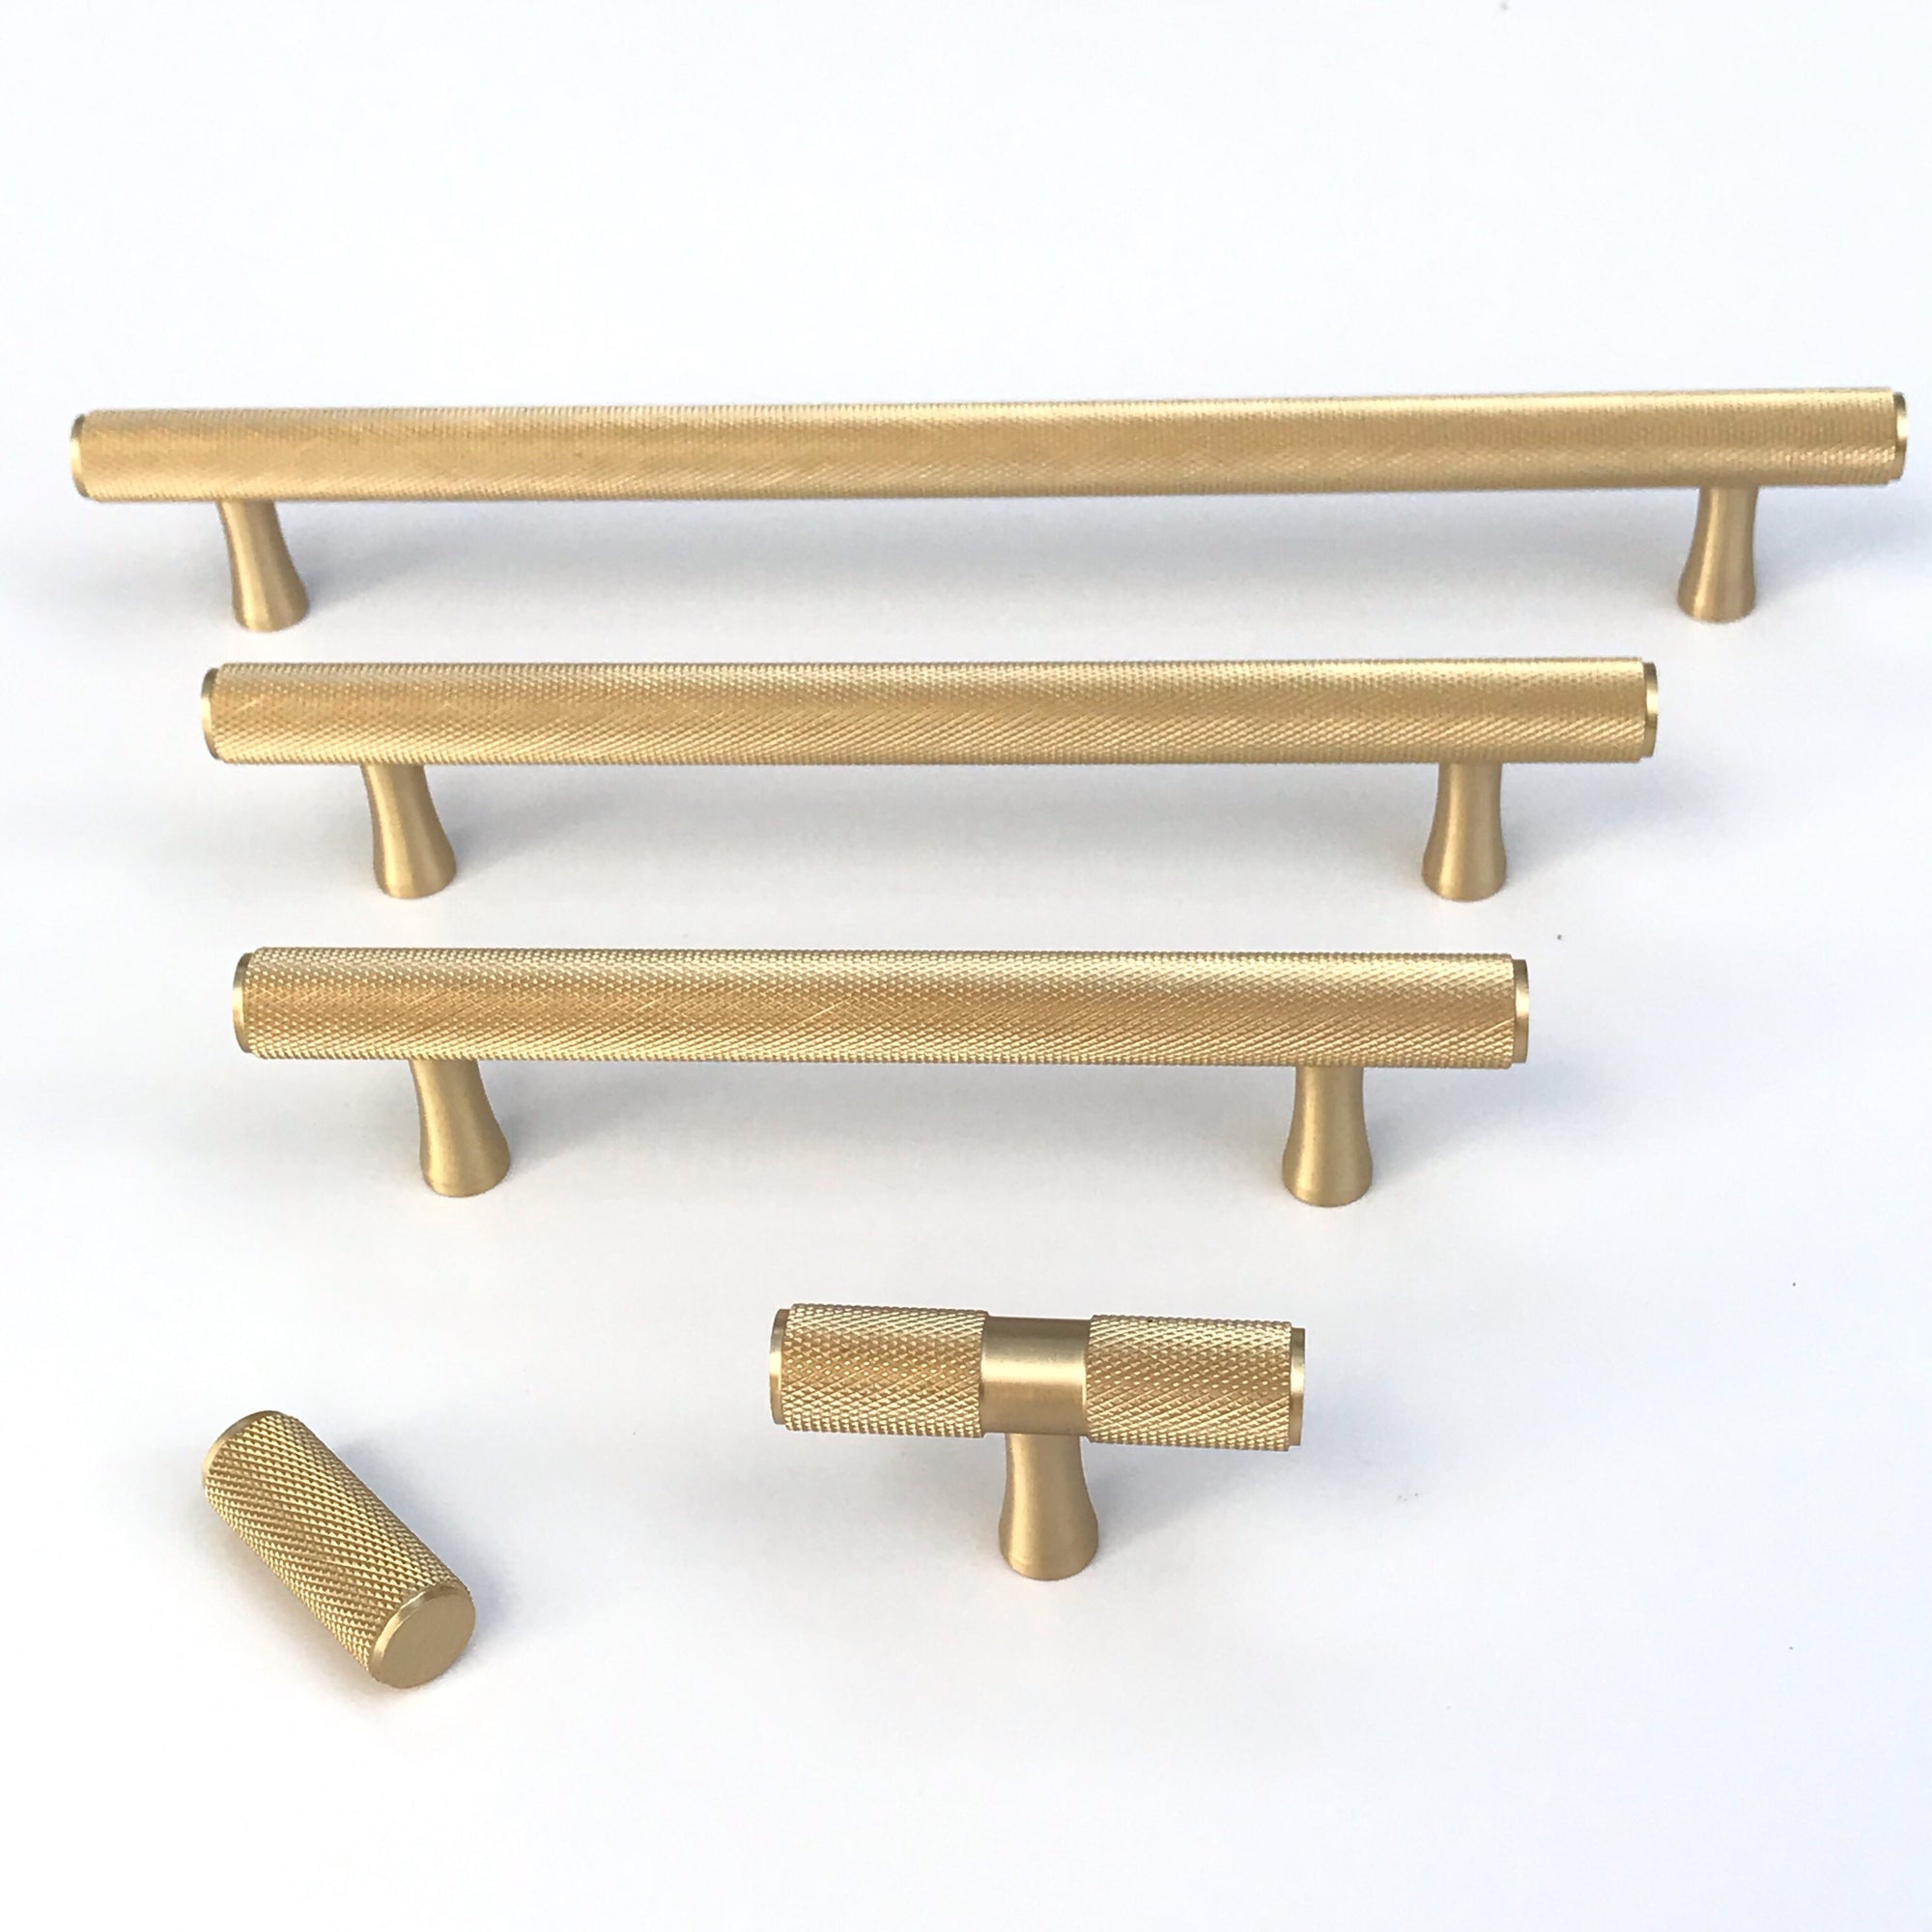 Brass Solid "Texture" Knurled Drawer Pulls and Knobs in Satin Brass